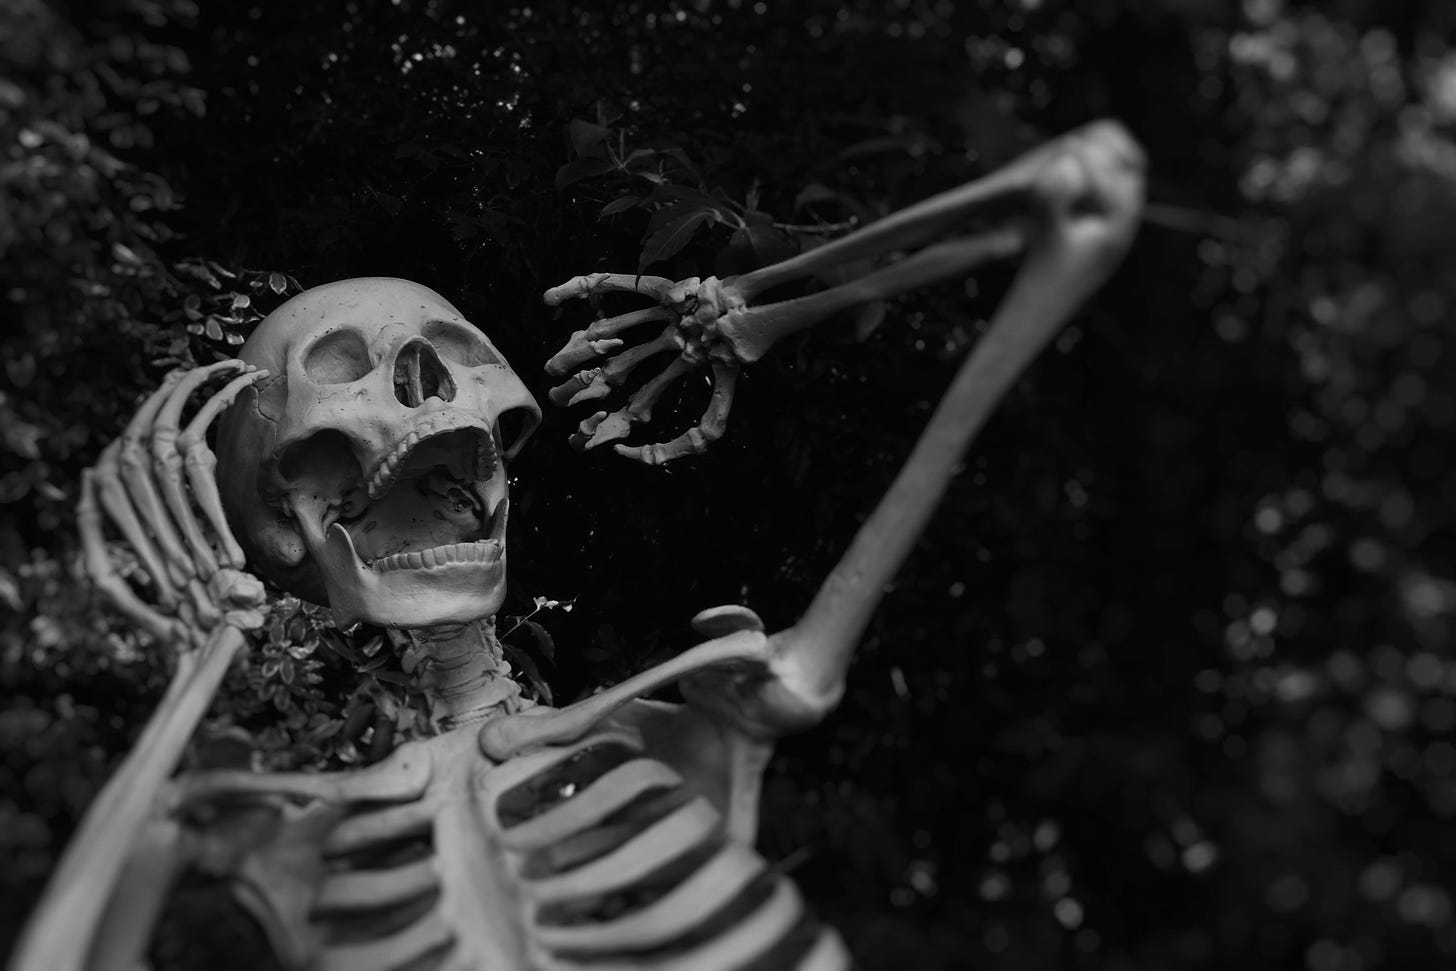 A plastic skeleton in black and white holds its arms near its head and opens its mouth as if screaming.